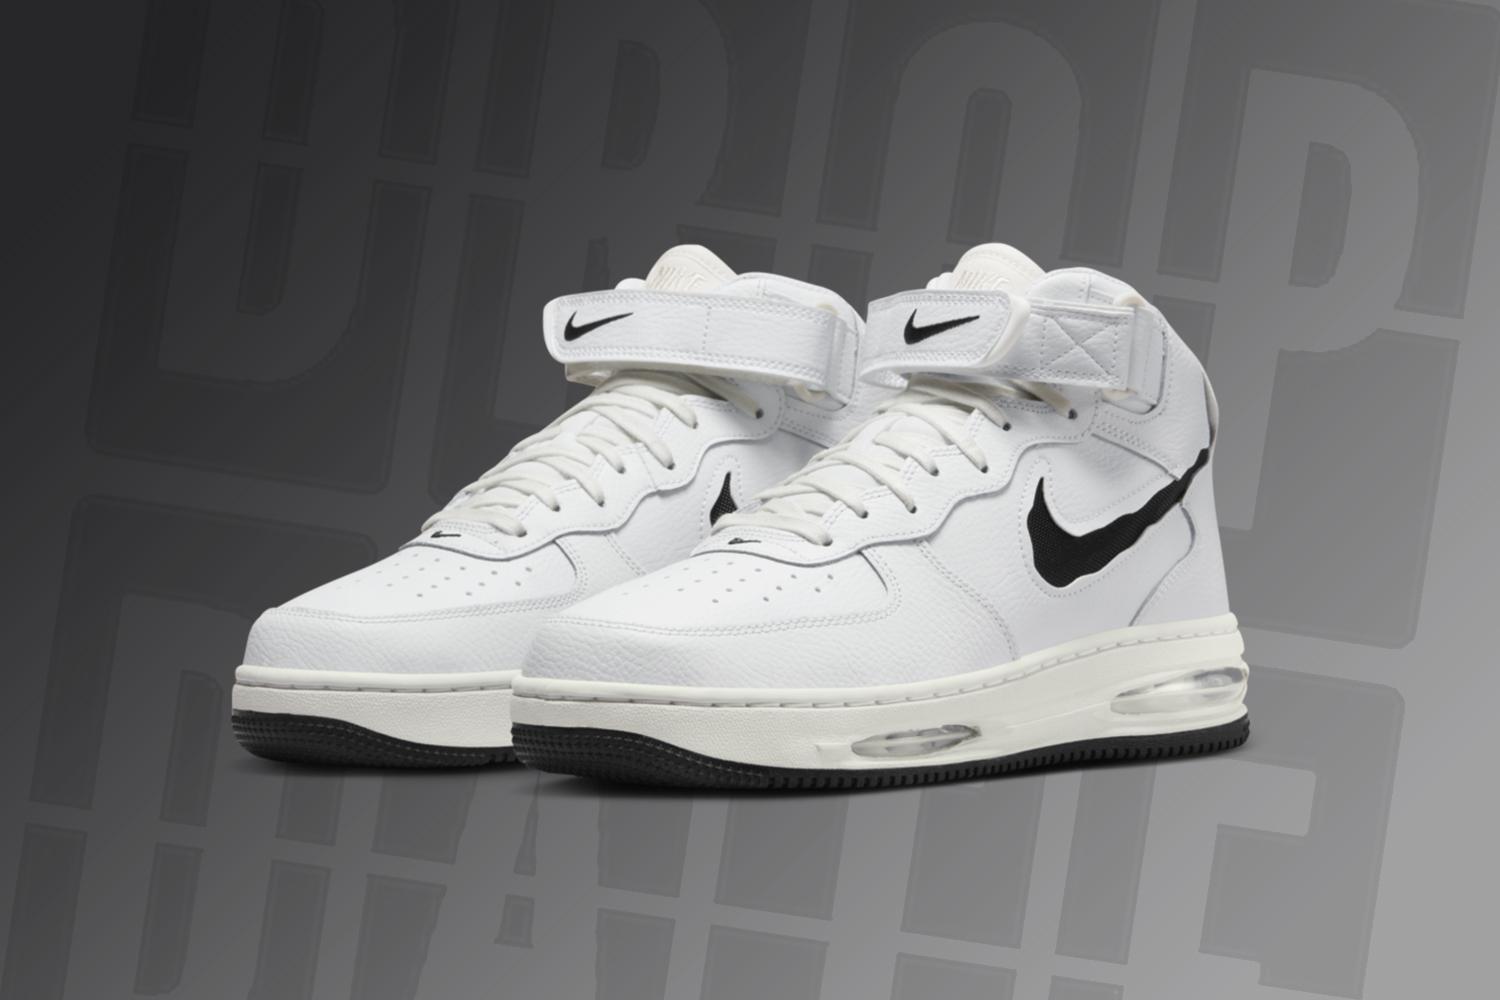 Nike Air Max Force 1 Mid | A Swoosh Crossover Episode